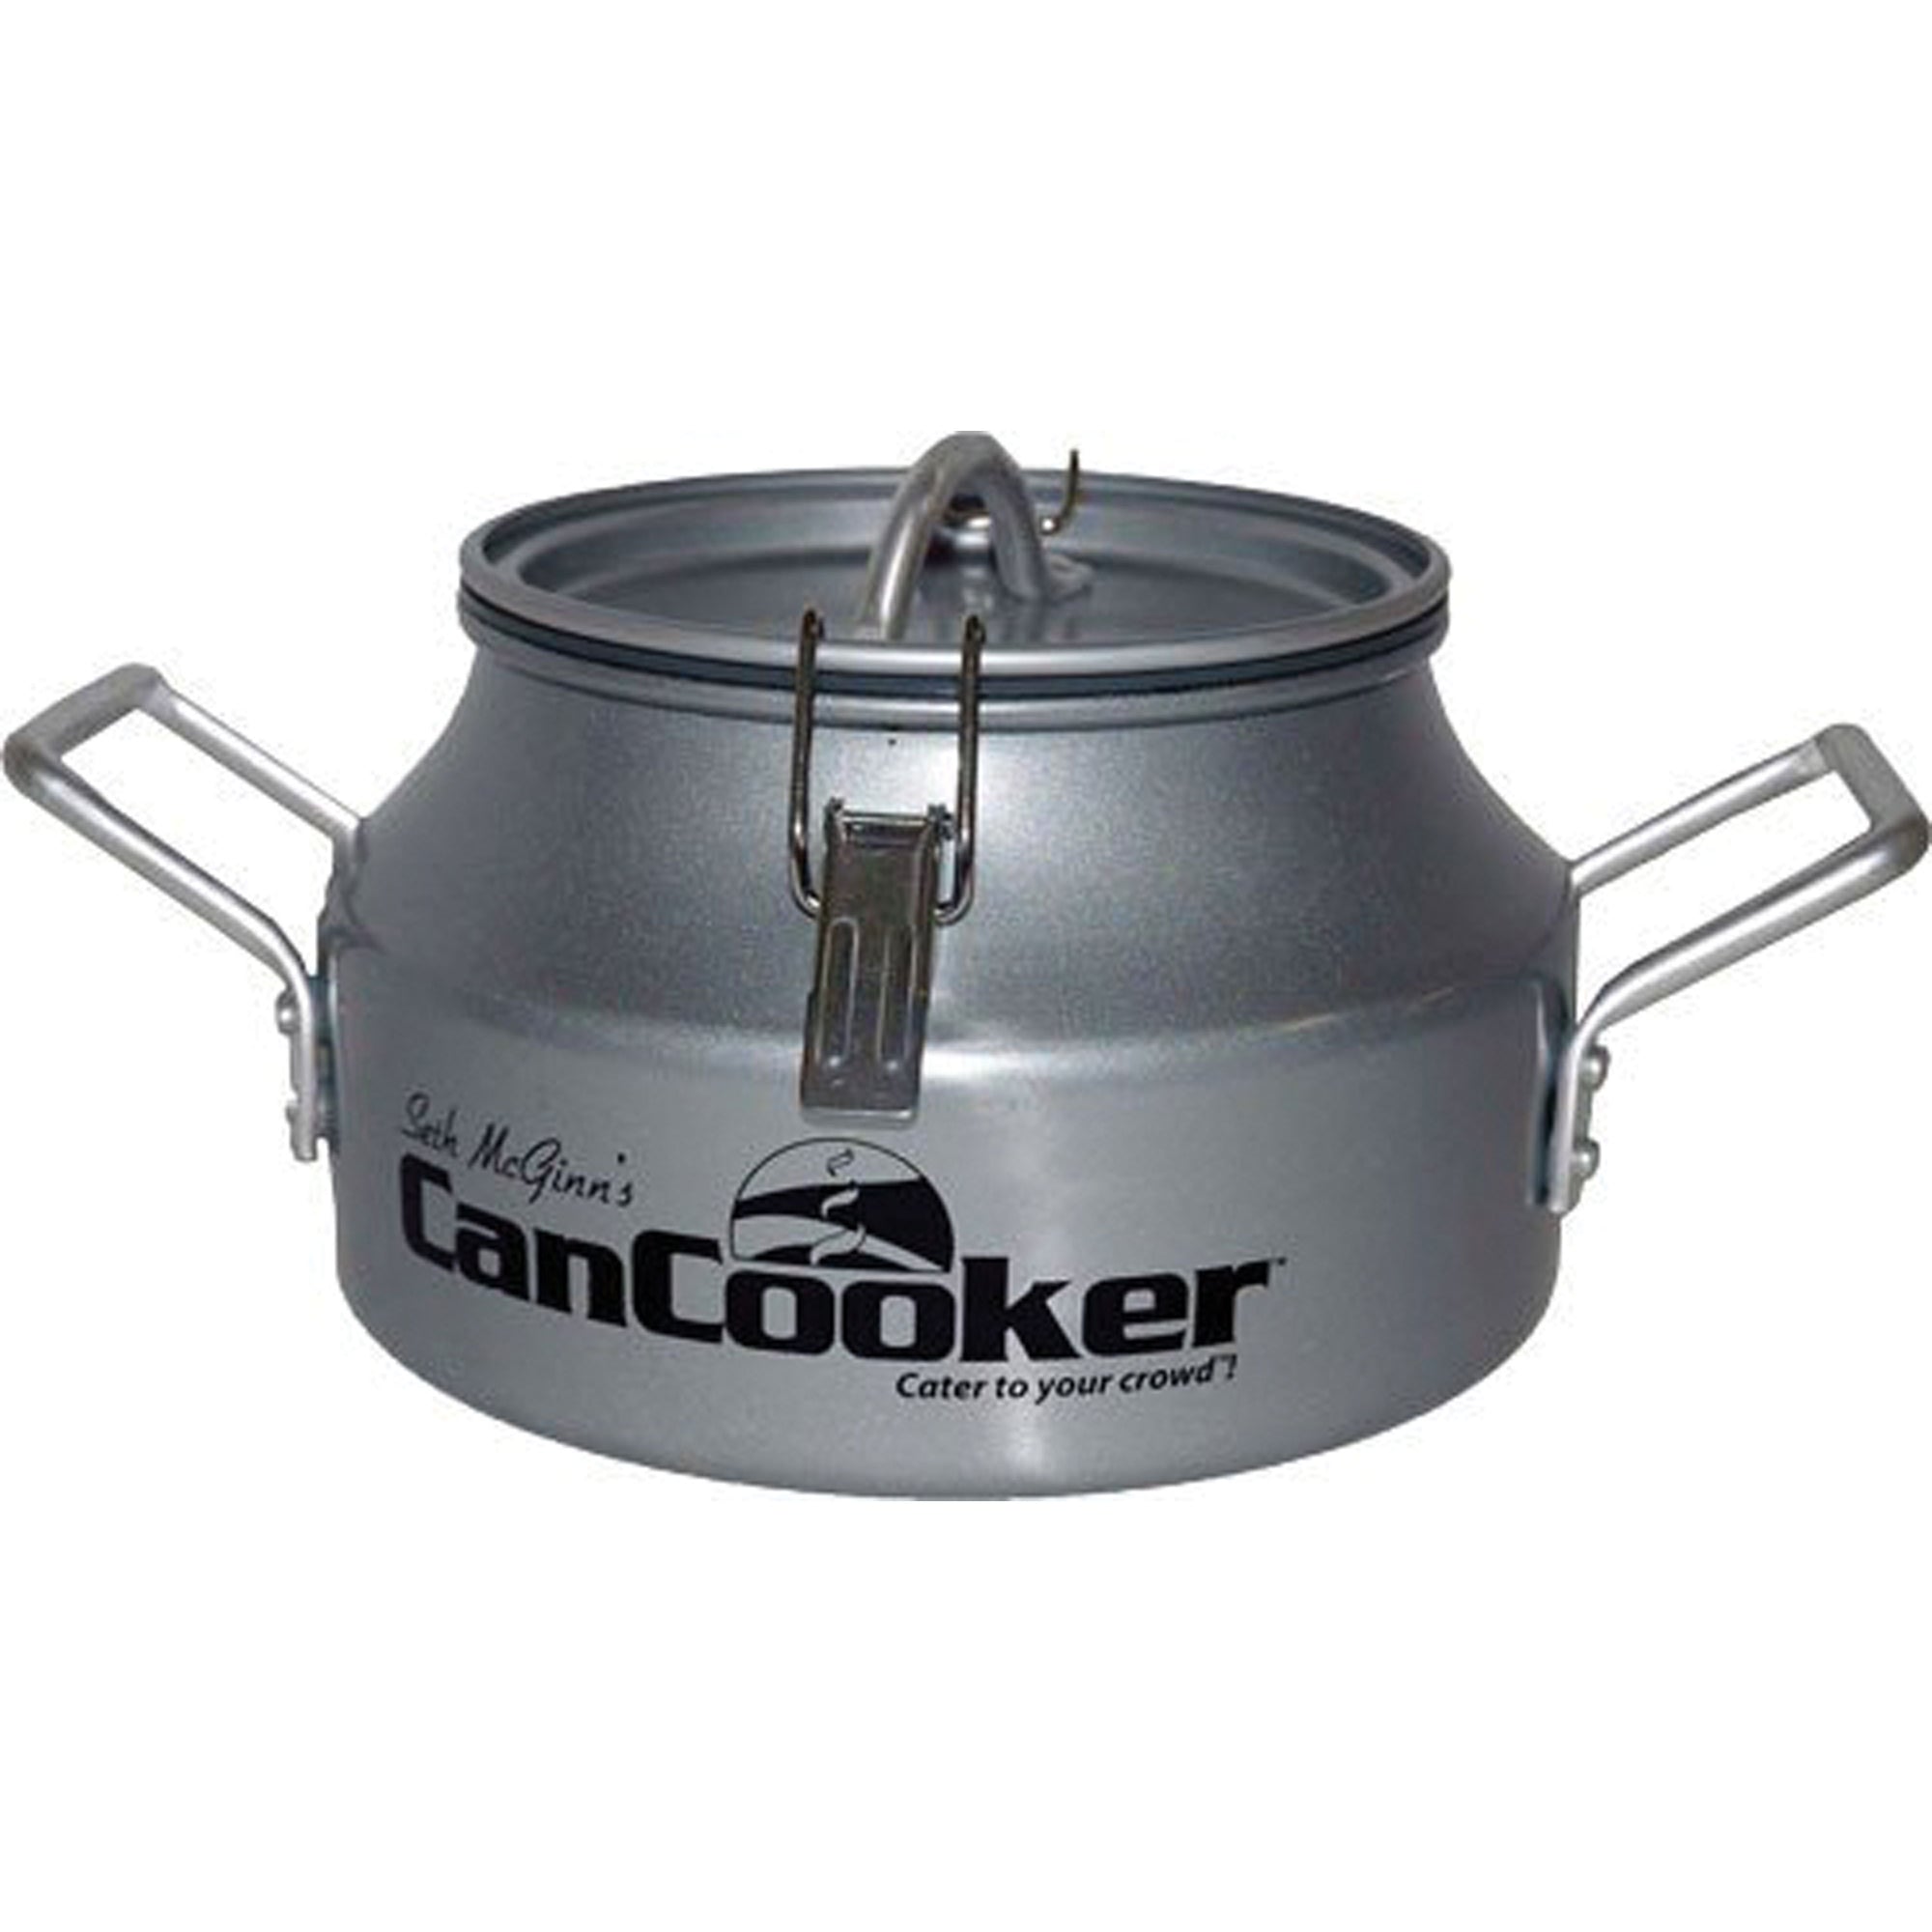 CanCooker G15-2016 CanCooker Companion with Non-Stick Coating